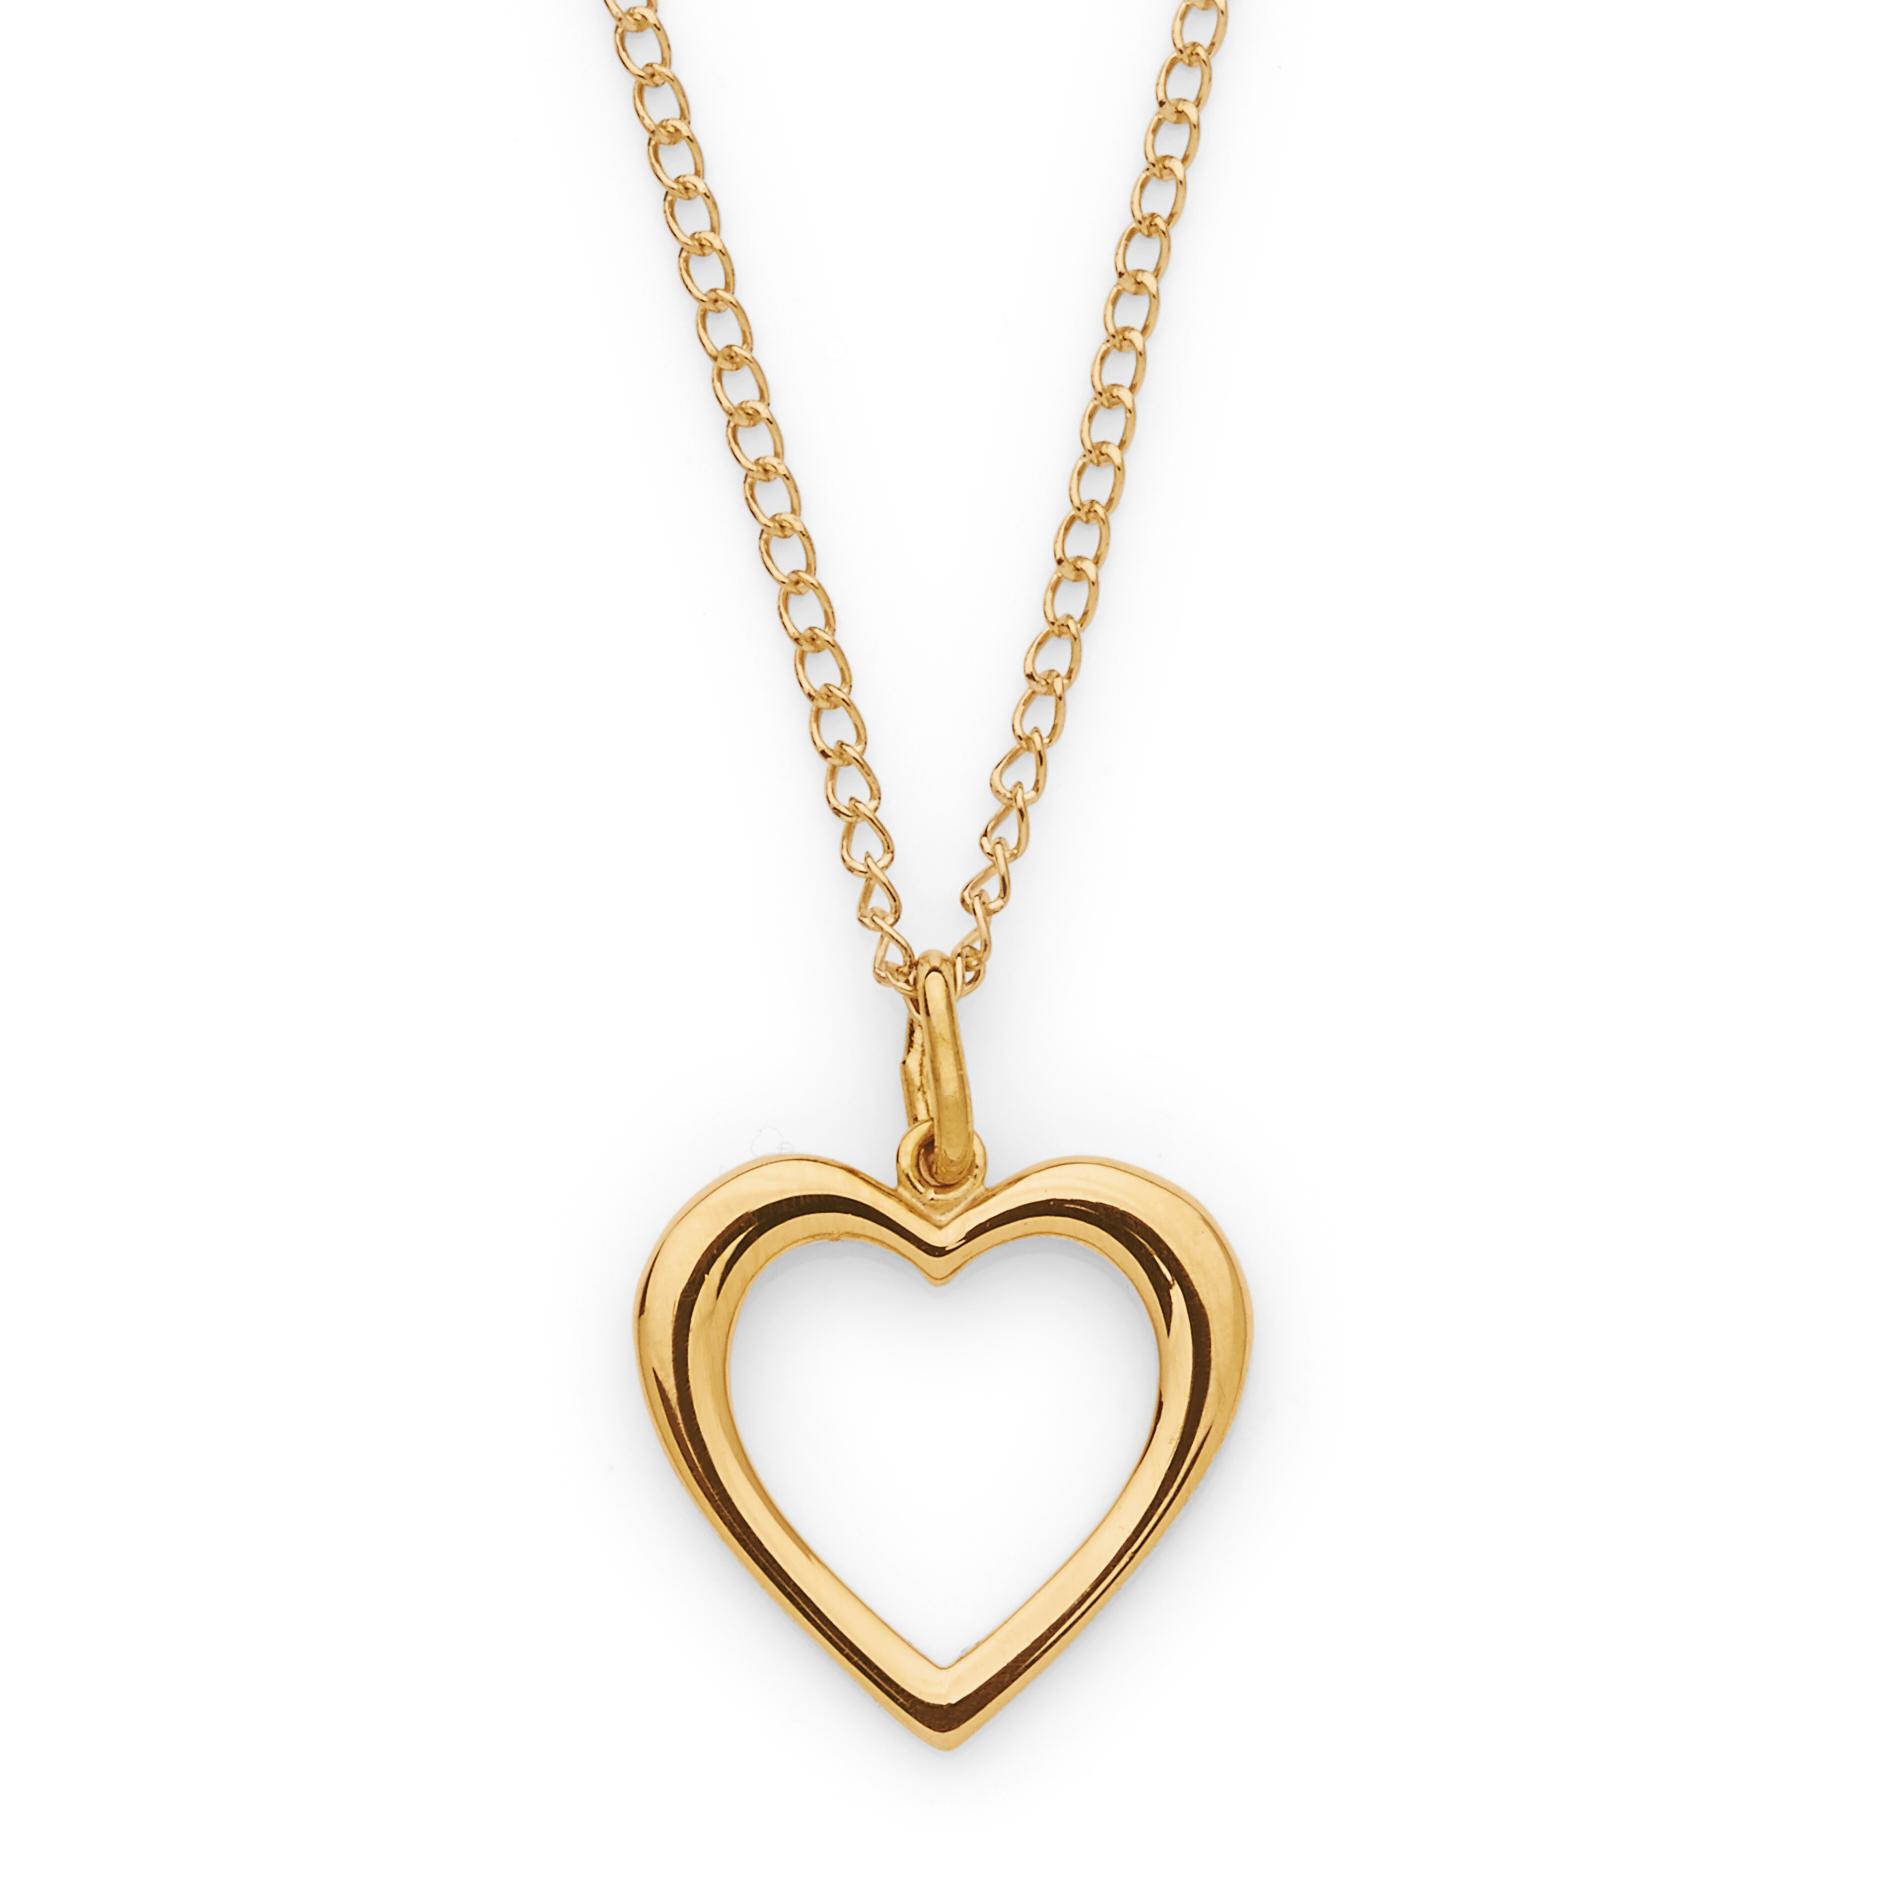 10K Yellow Gold Open Heart Necklace - Jewelry - Pendants & Necklaces